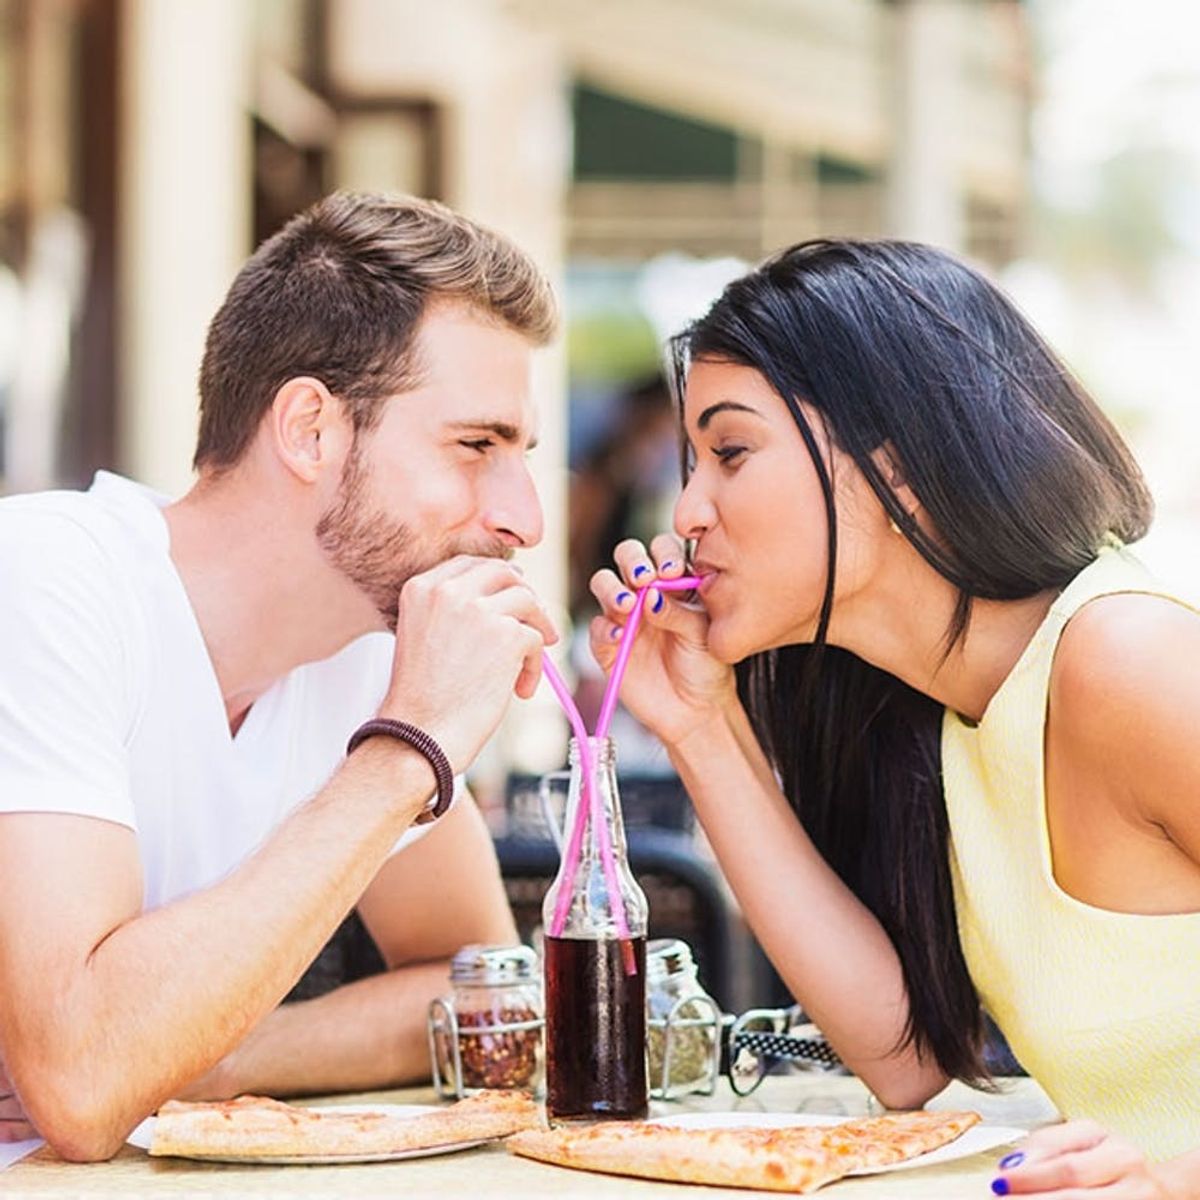 This Is the Surprising Quality Most Americans Find Sexy in a Partner